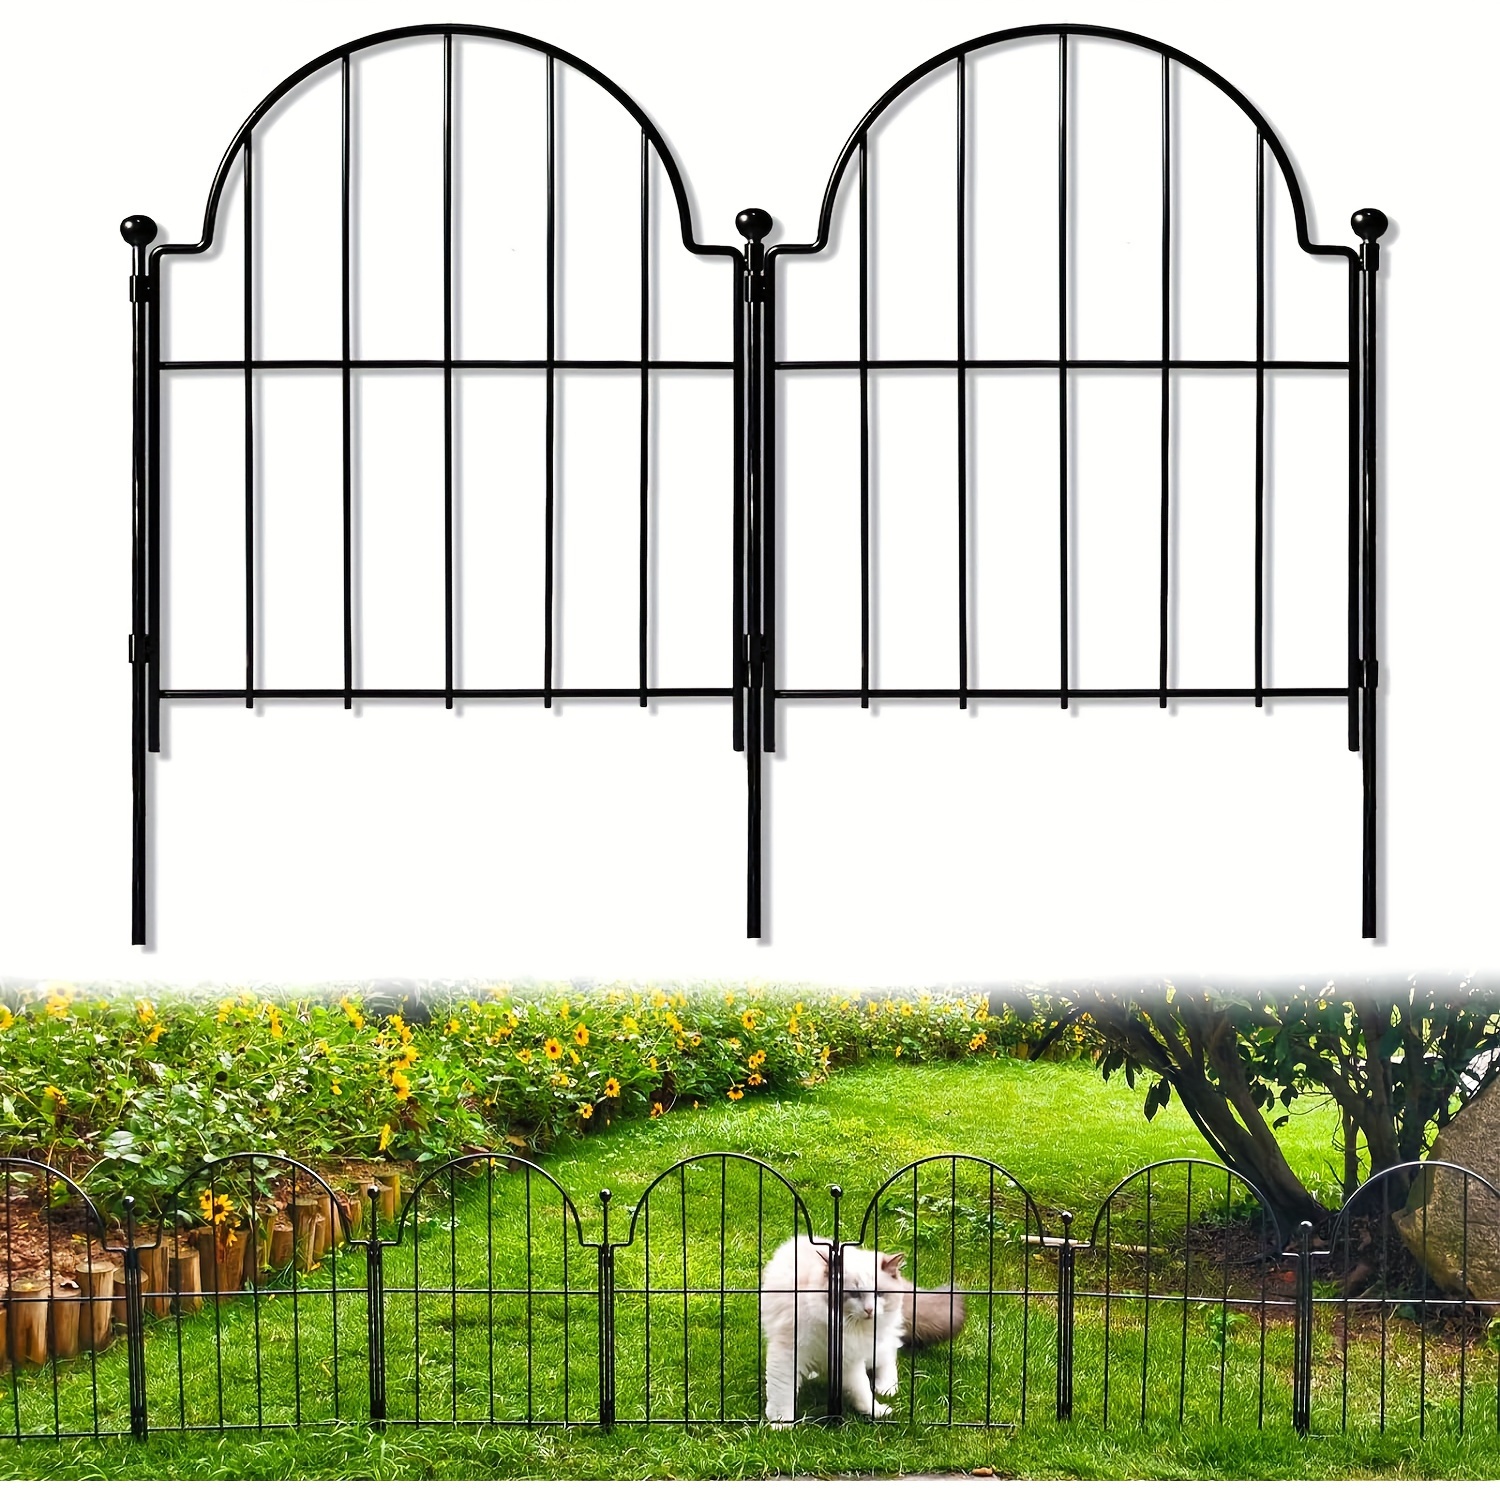 

Garden Fence, 22 In (h) X 21 Ft (l) Arched Rustproof Metal No Dig Fence Garden Fence Border, Ground Stake Animal Barrier Fence For Rabbit Dog, Outdoor Landscape Decor For Yard & Patio, 19 Pack